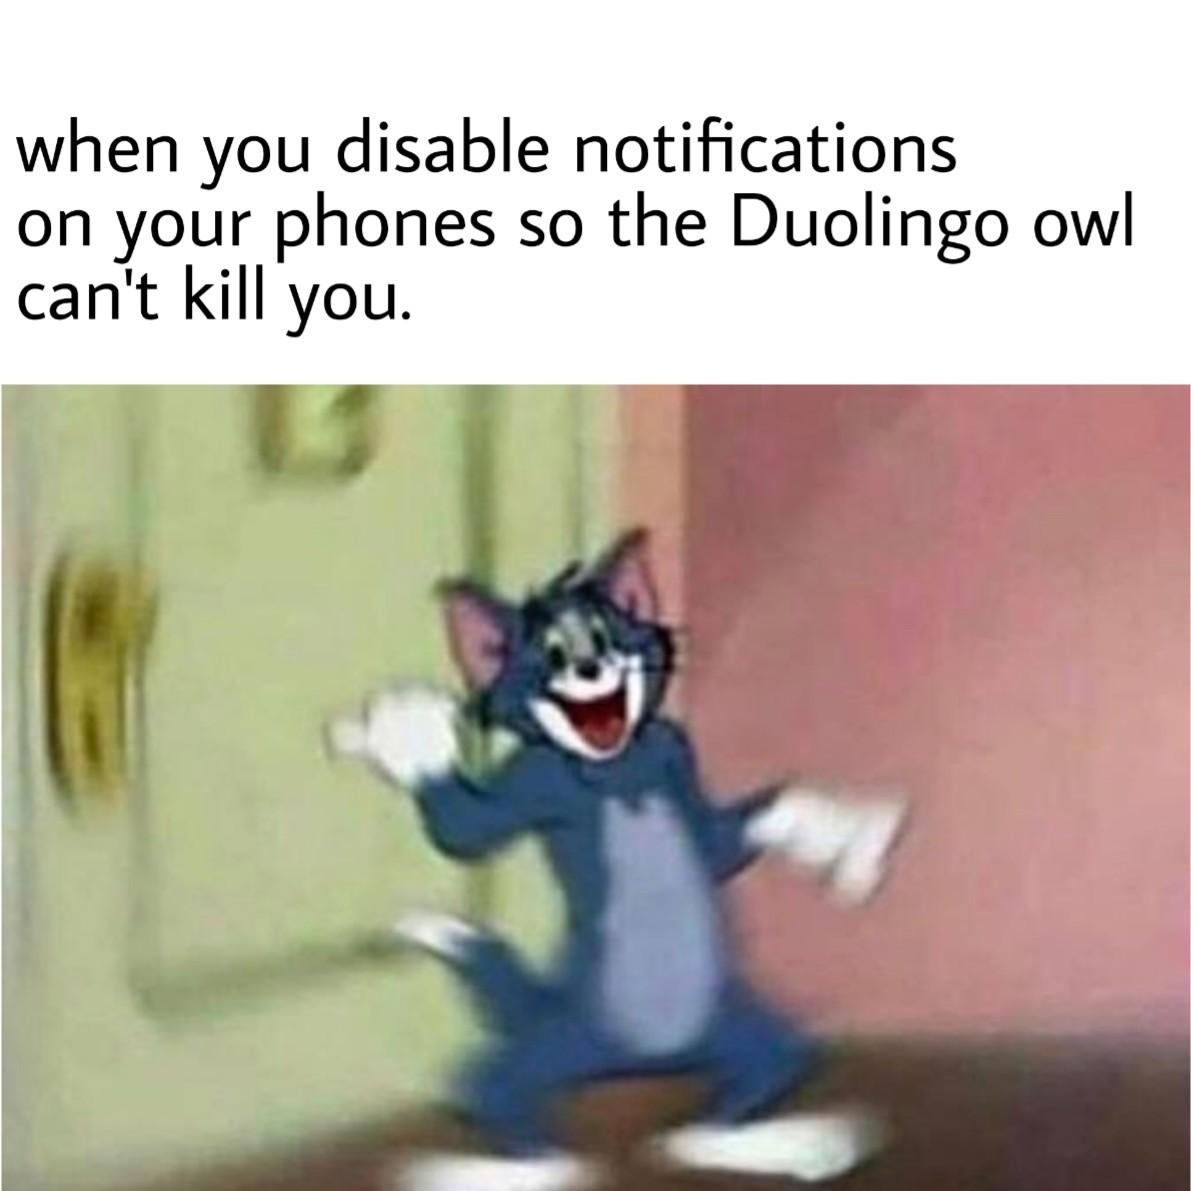 When you disable notifications on your phones so the Duolingo owl can't kill you meme